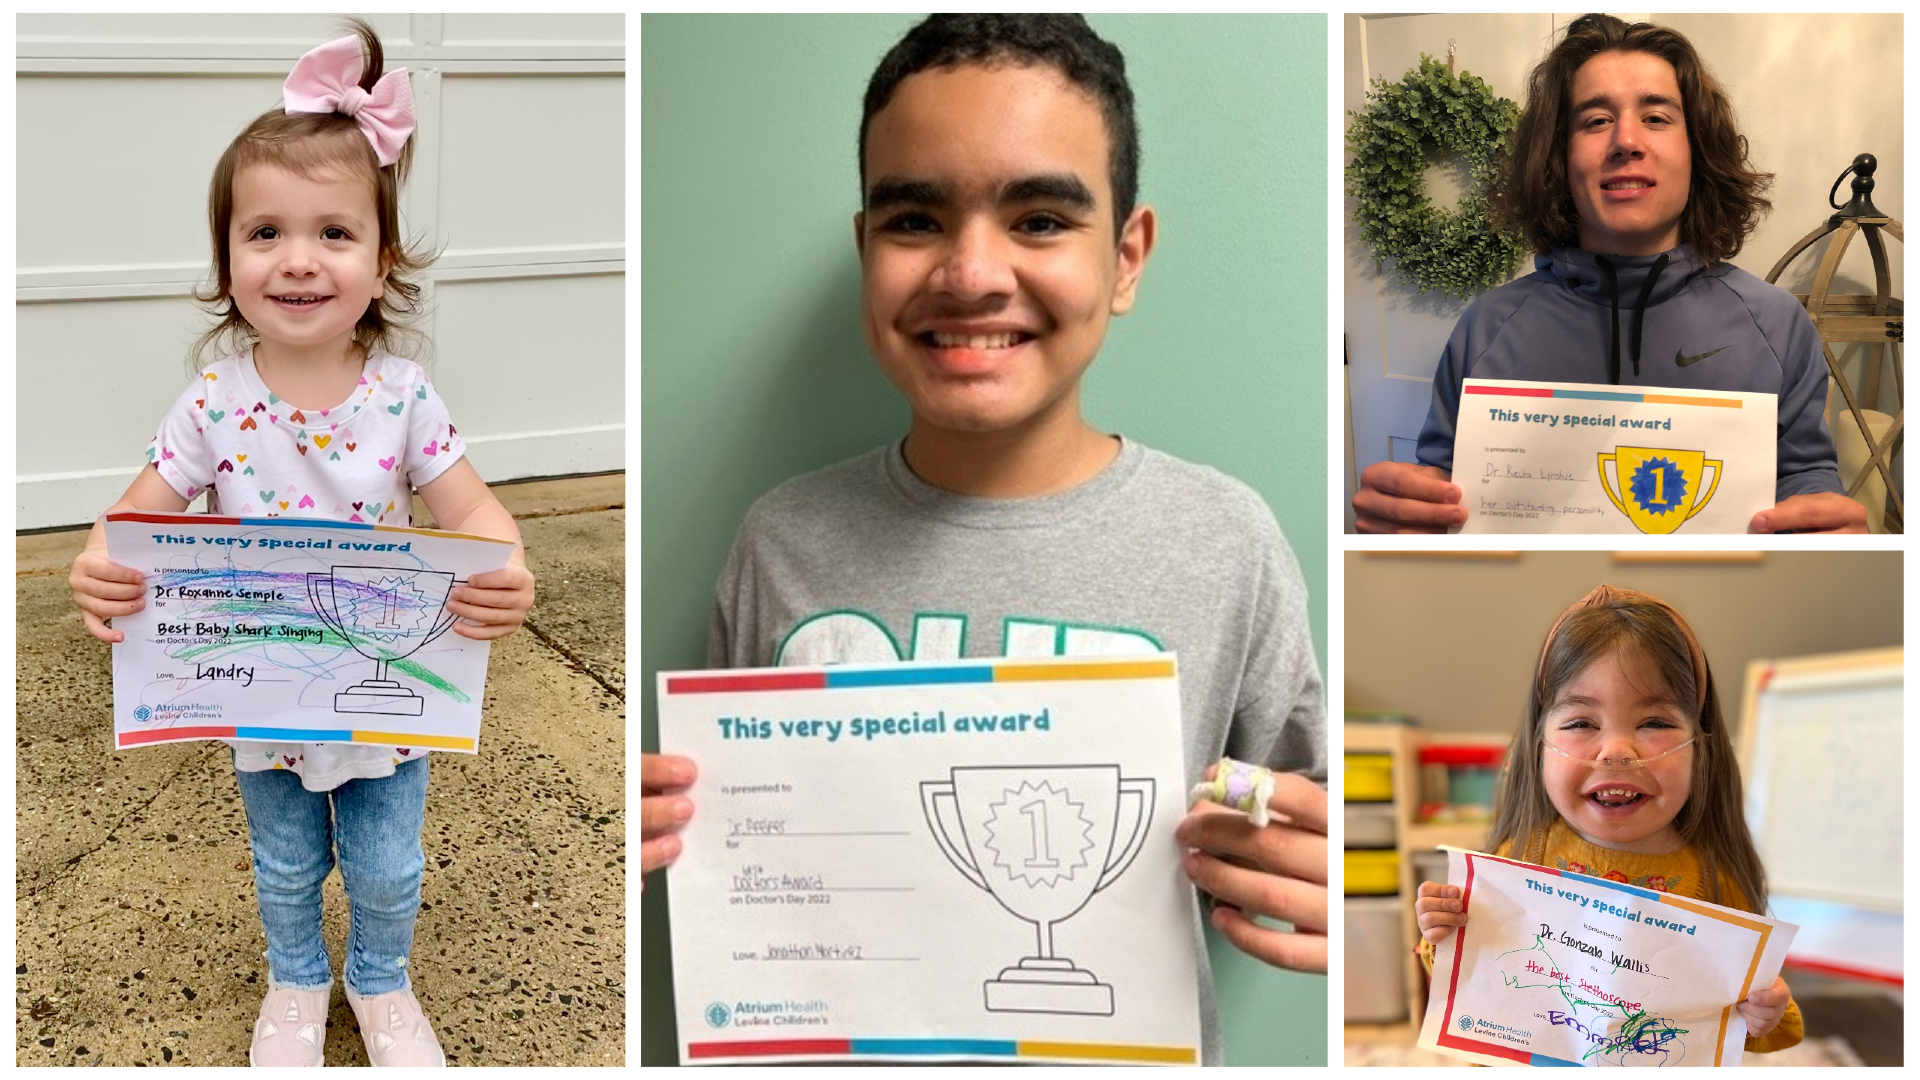 To celebrate Doctor’s Day 2022, patients across Levine Children’s awarded their doctors with funny, sweet and colorful superlatives to honor their commitment to personalized care.